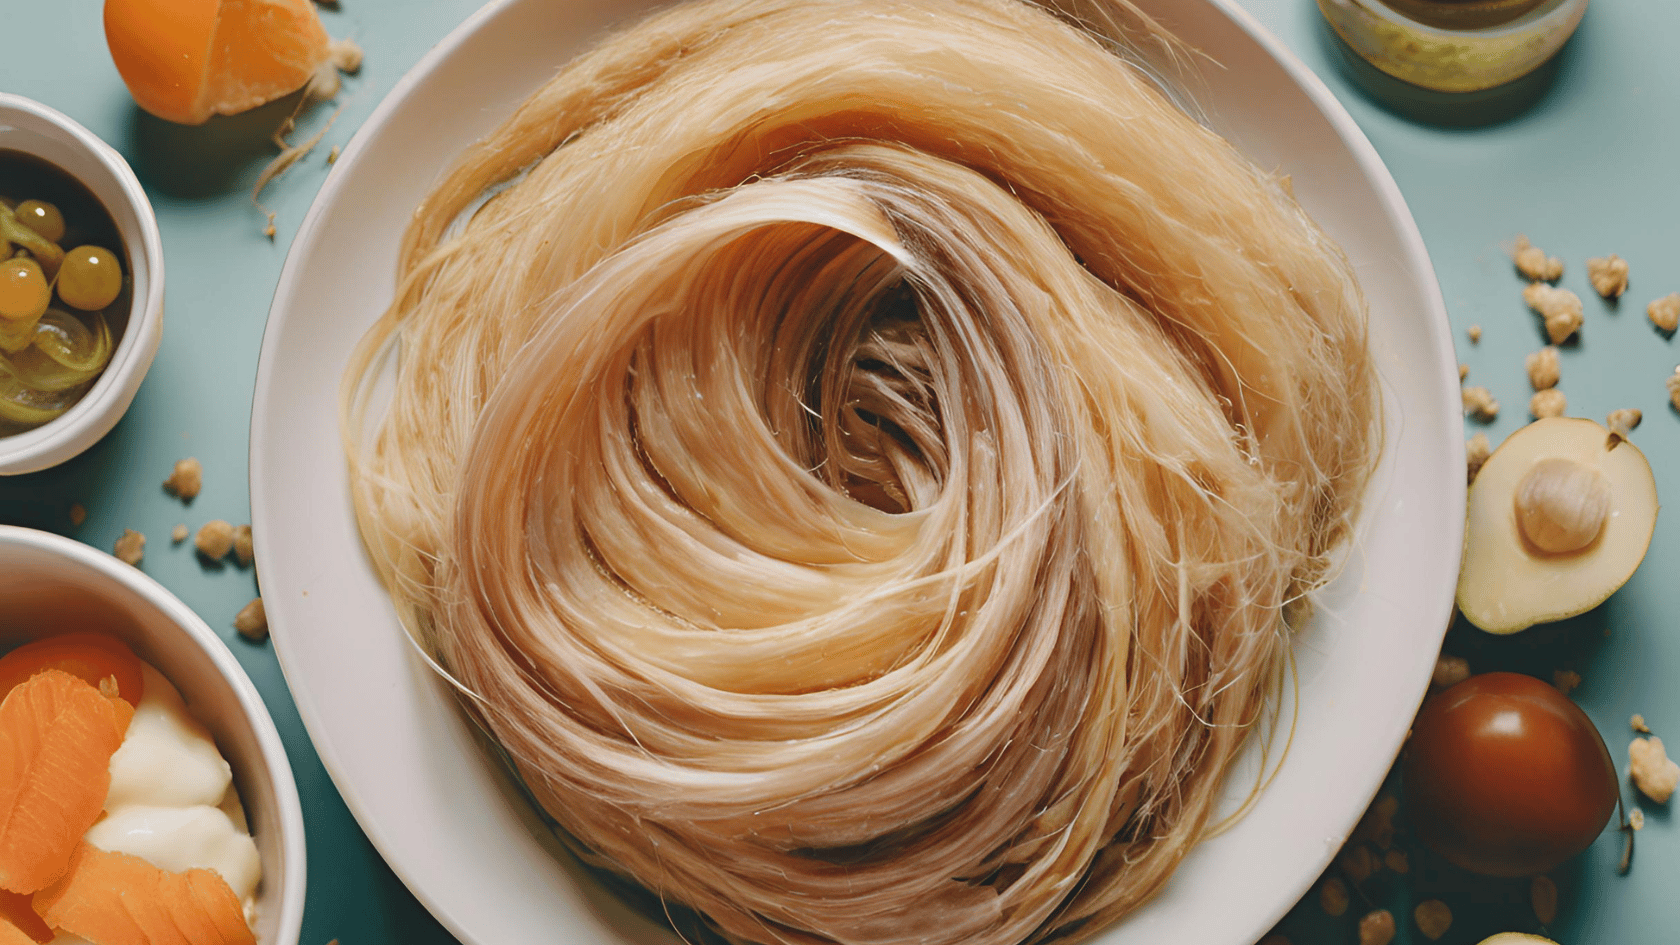 spiritual meaning of finding hair in your food